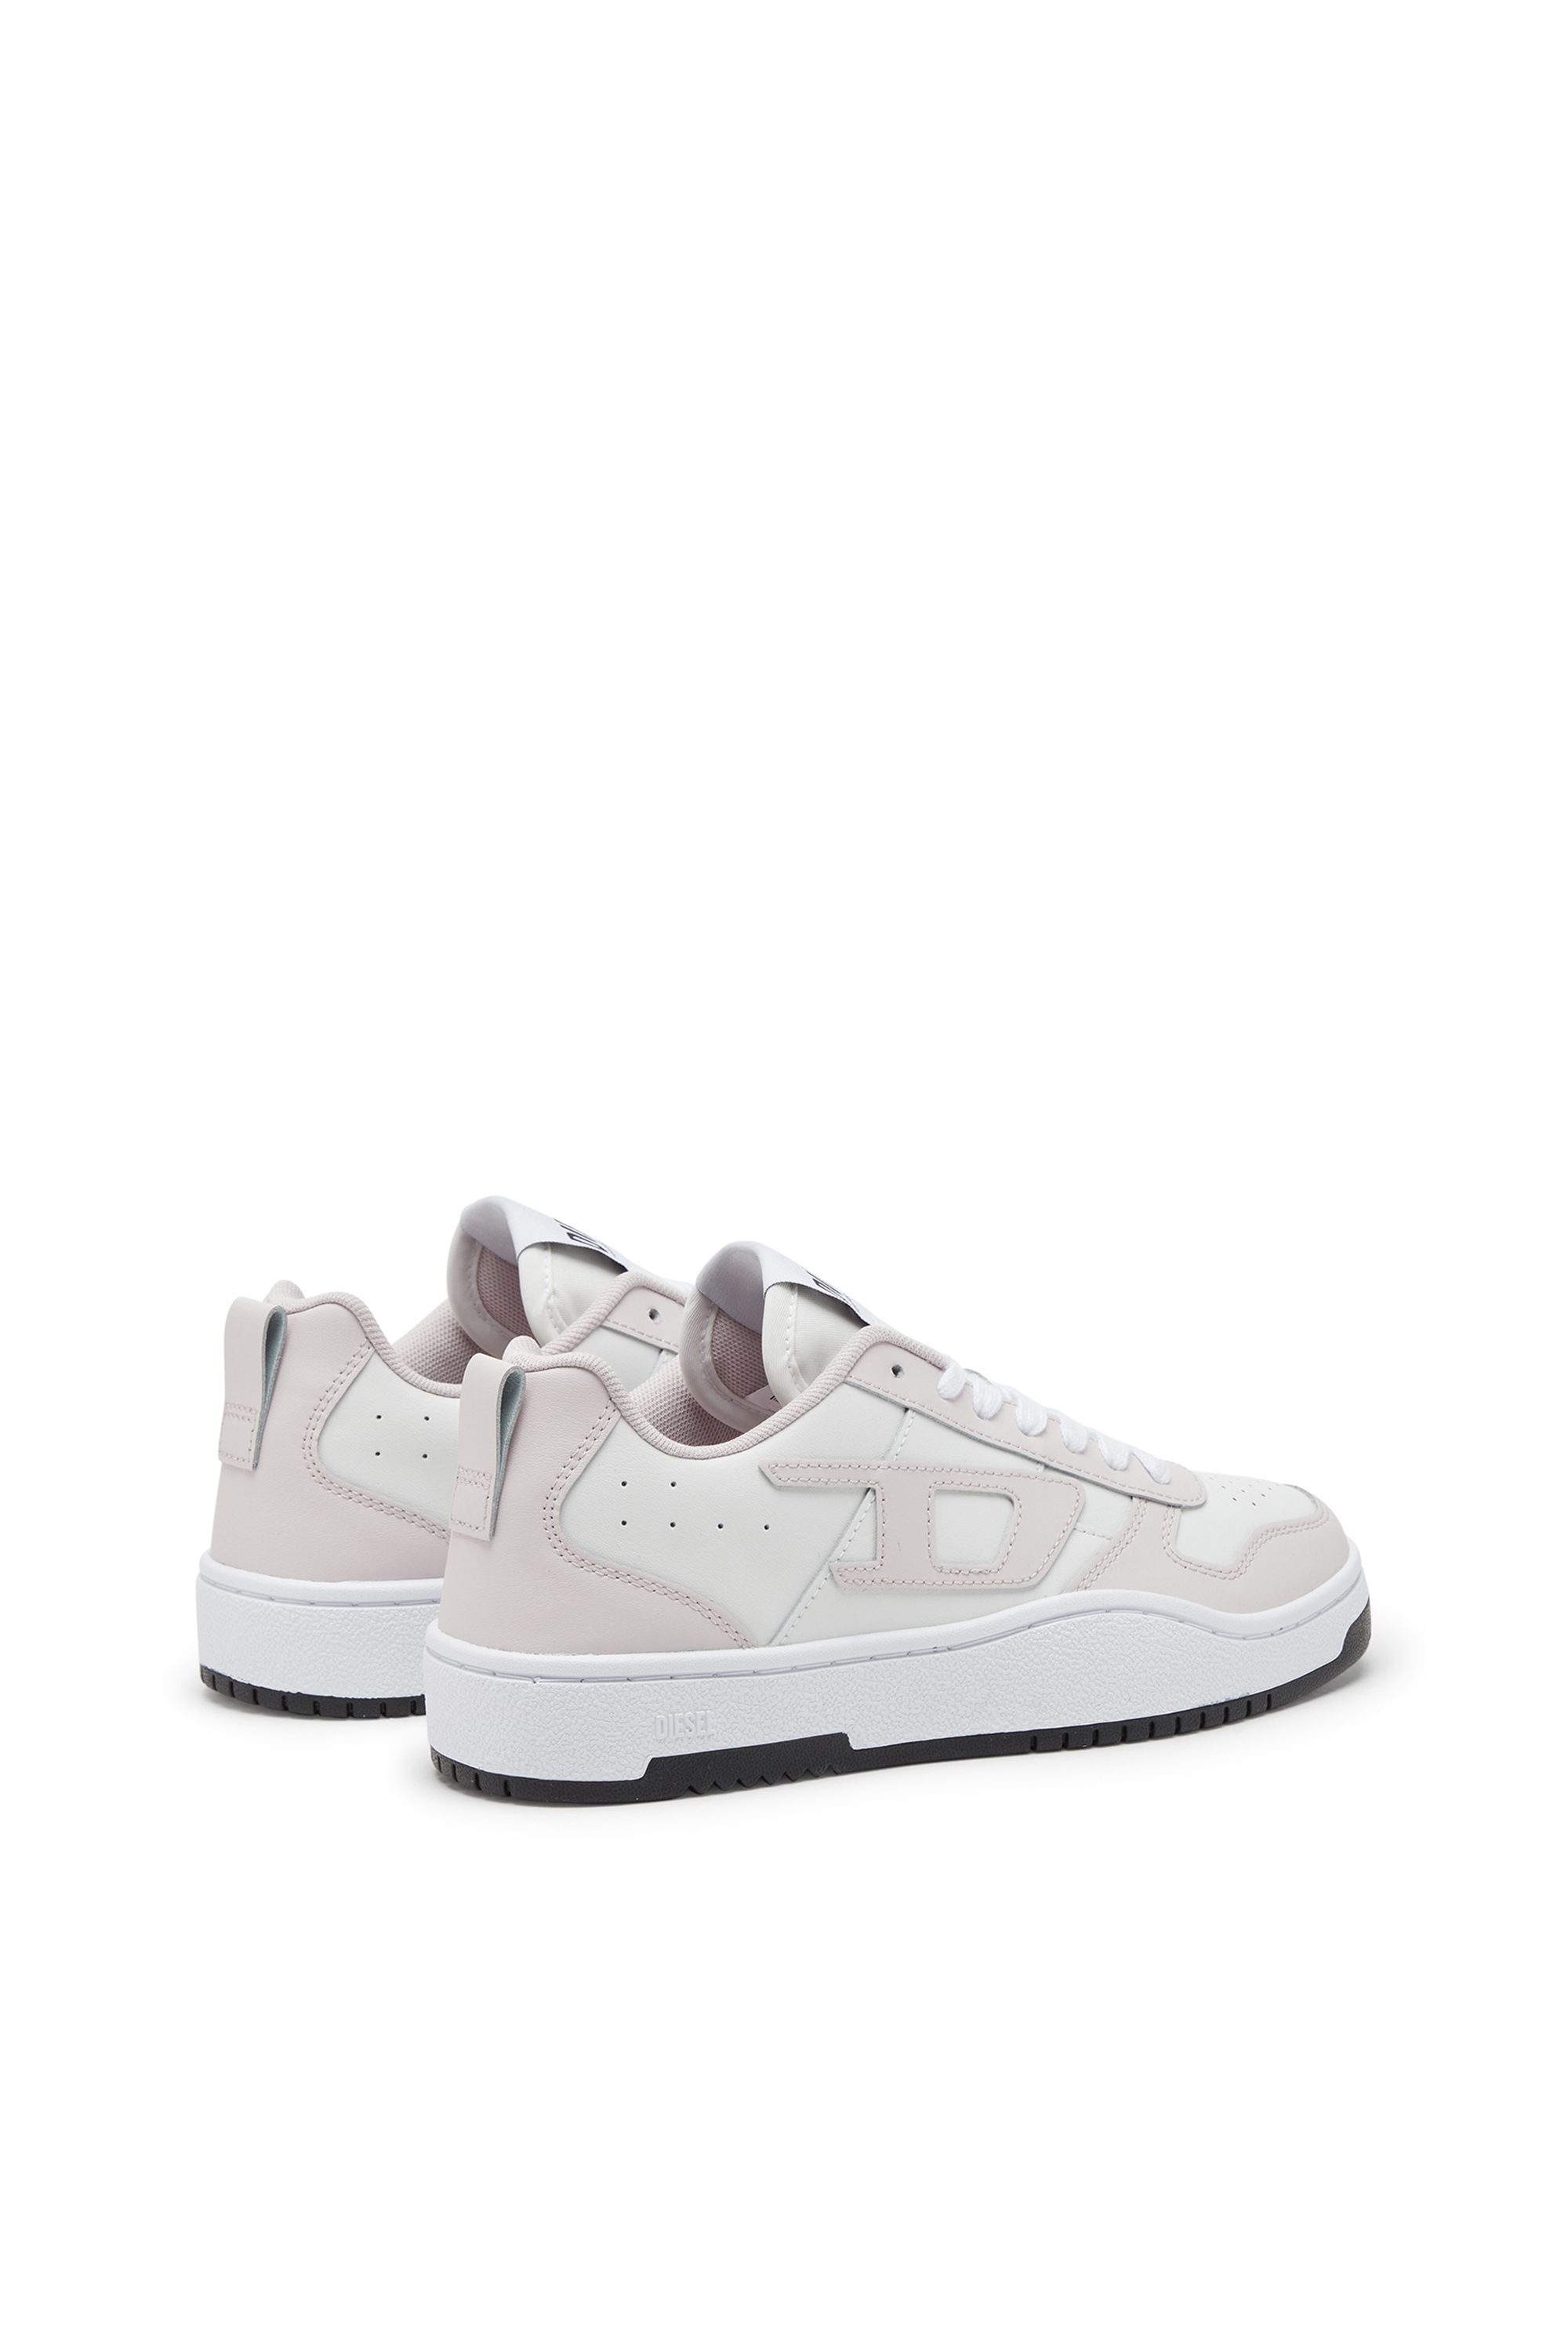 Diesel - S-UKIYO V2 LOW W, Woman S-Ukiyo Low-Low-top sneakers in leather and nylon in Multicolor - Image 3